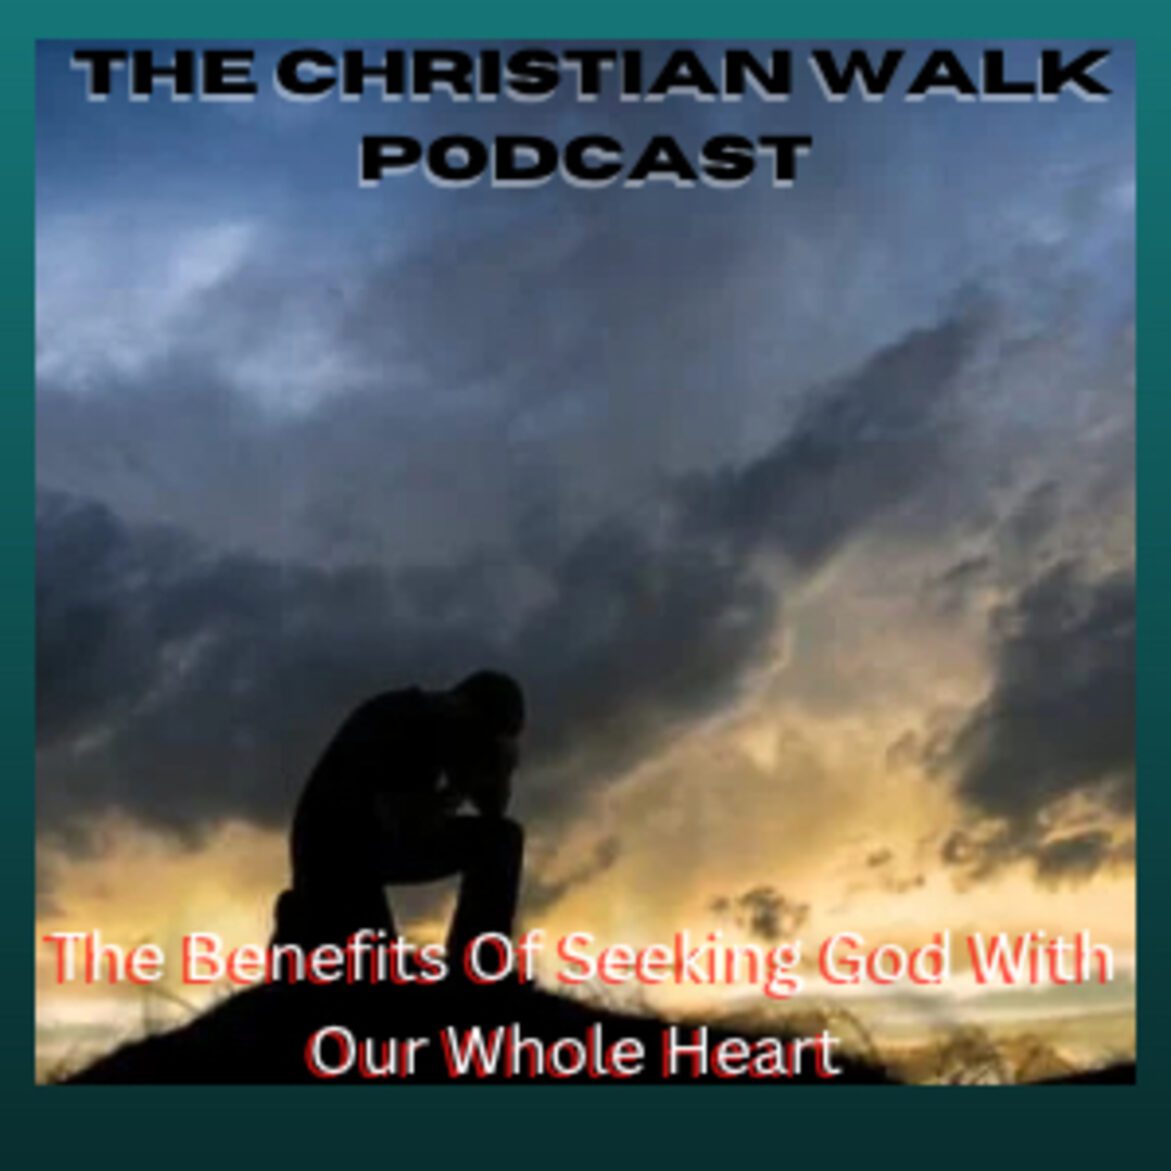 Black Podcasting - The Benefits of Seeking God With Our Whole Heart